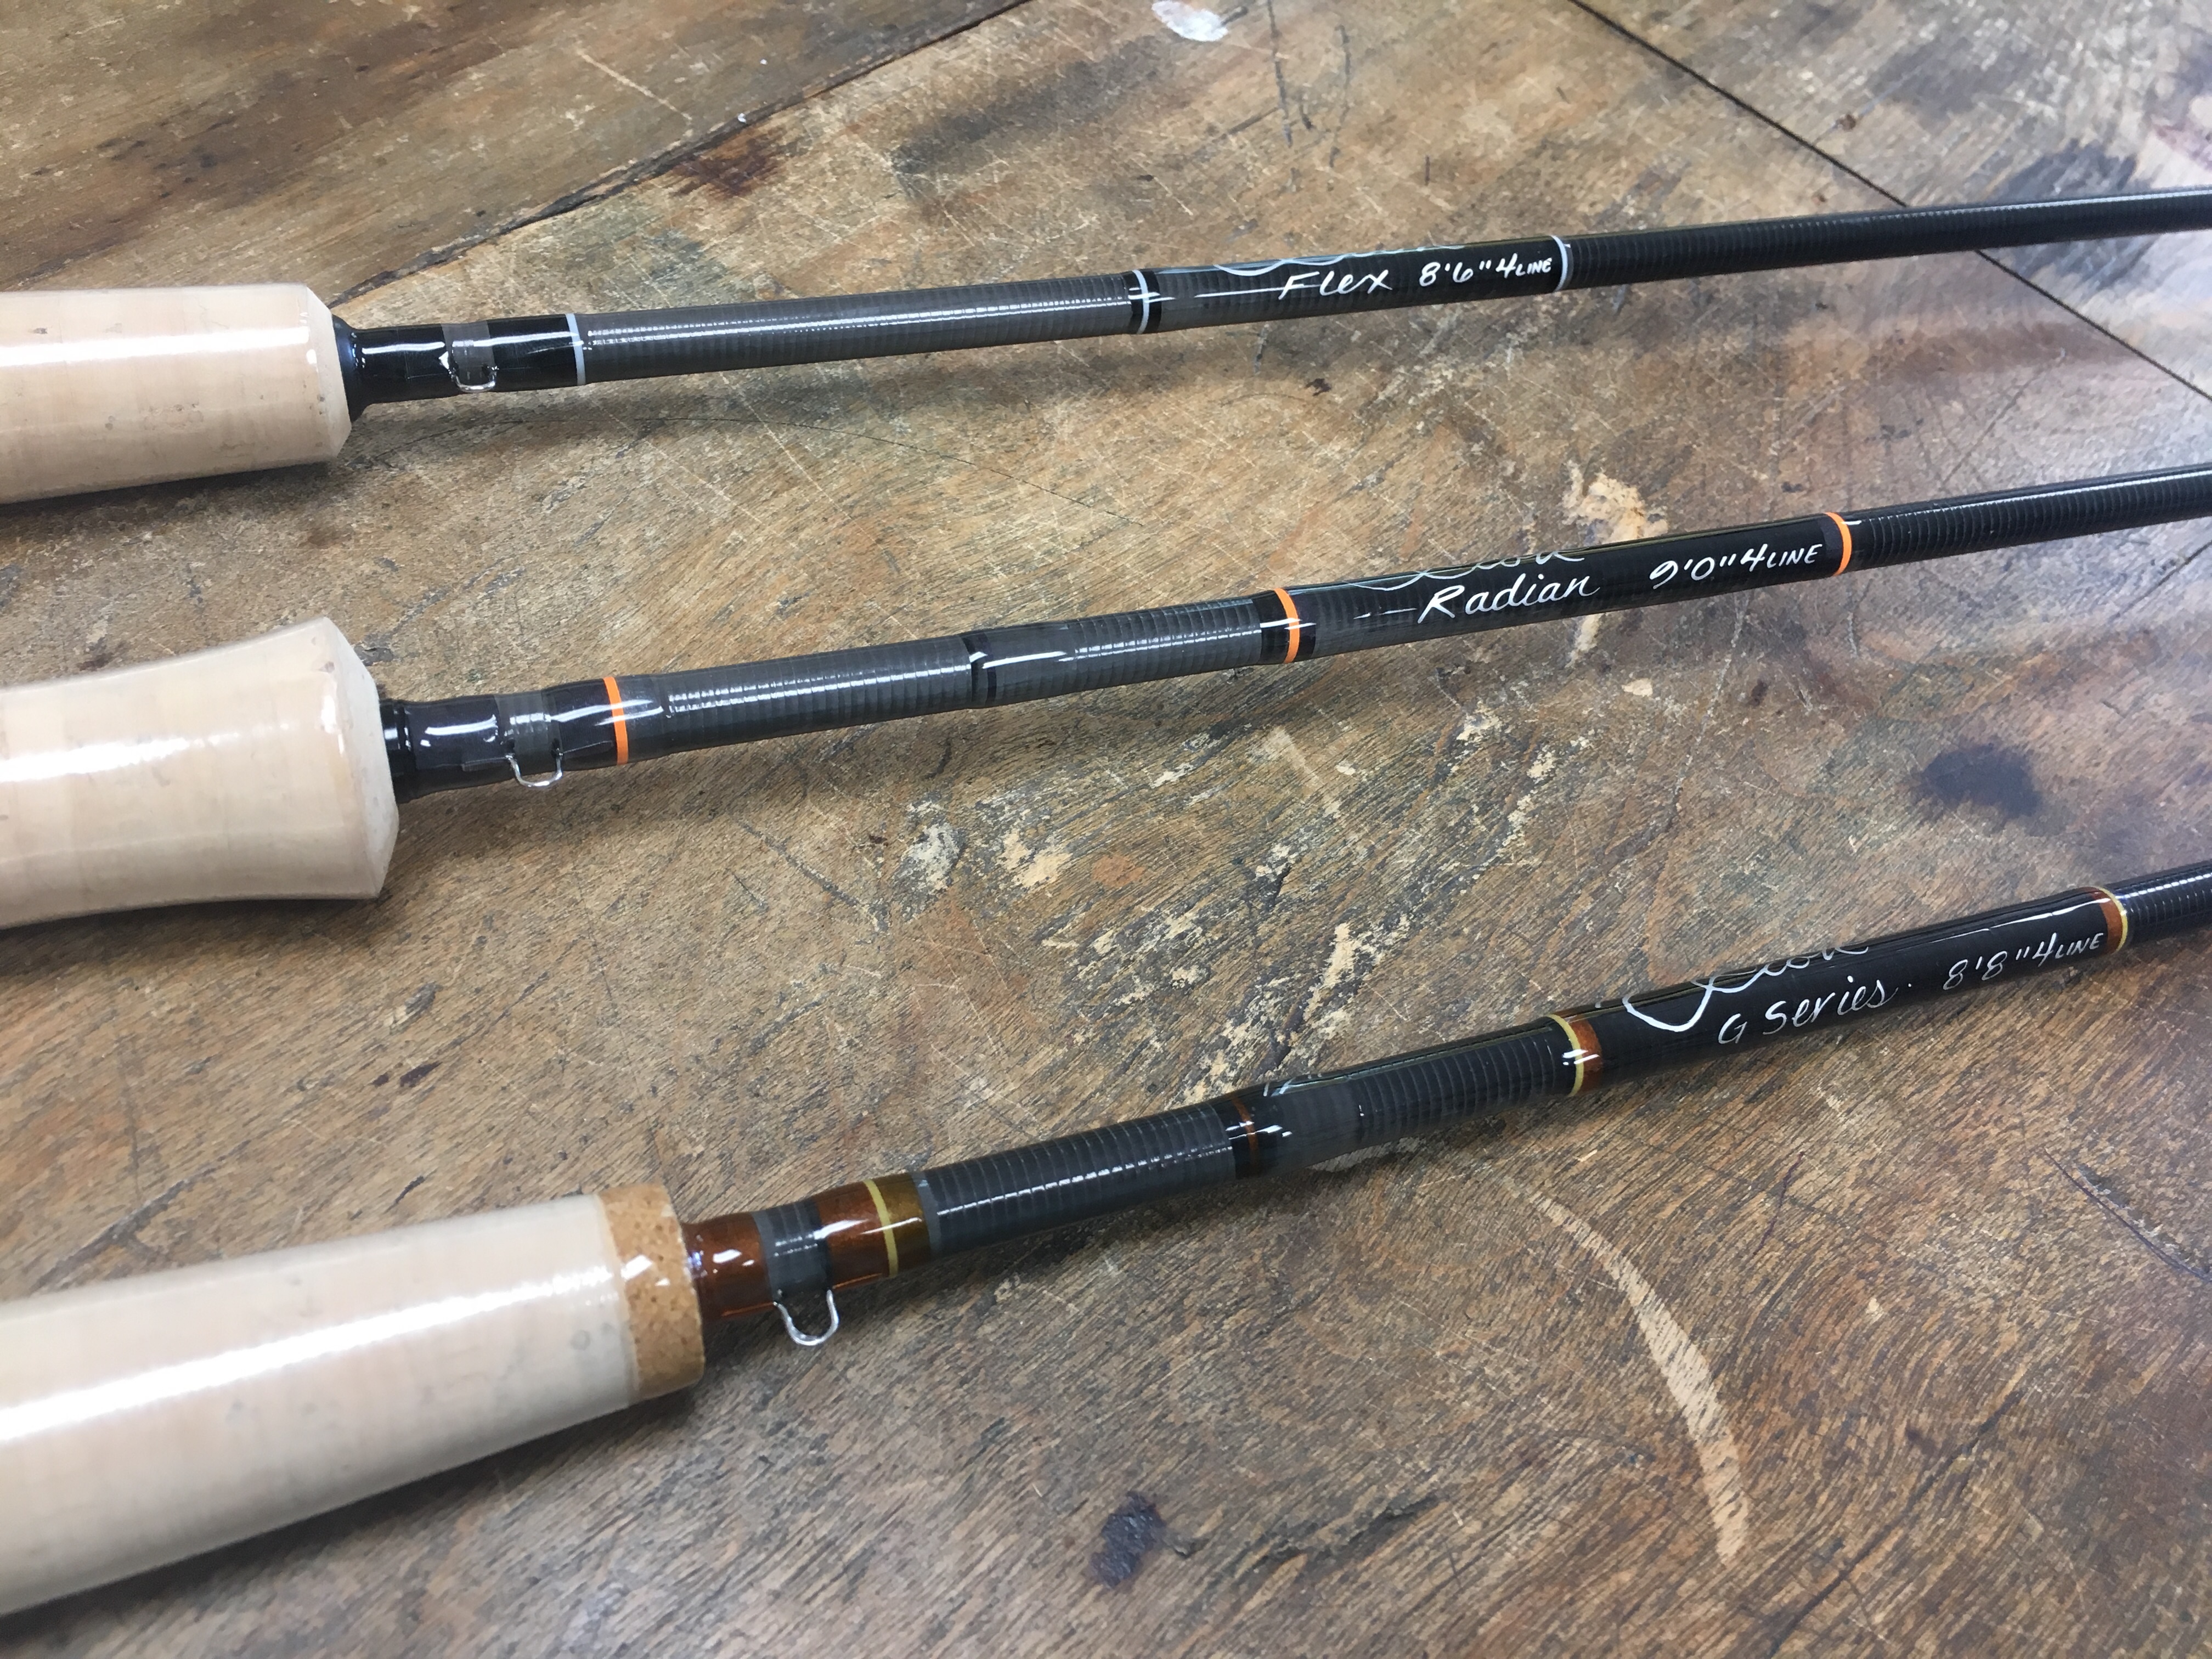 Scott And Winston Fly Rods On Sale! BACKWATER ANGLER, 41% OFF